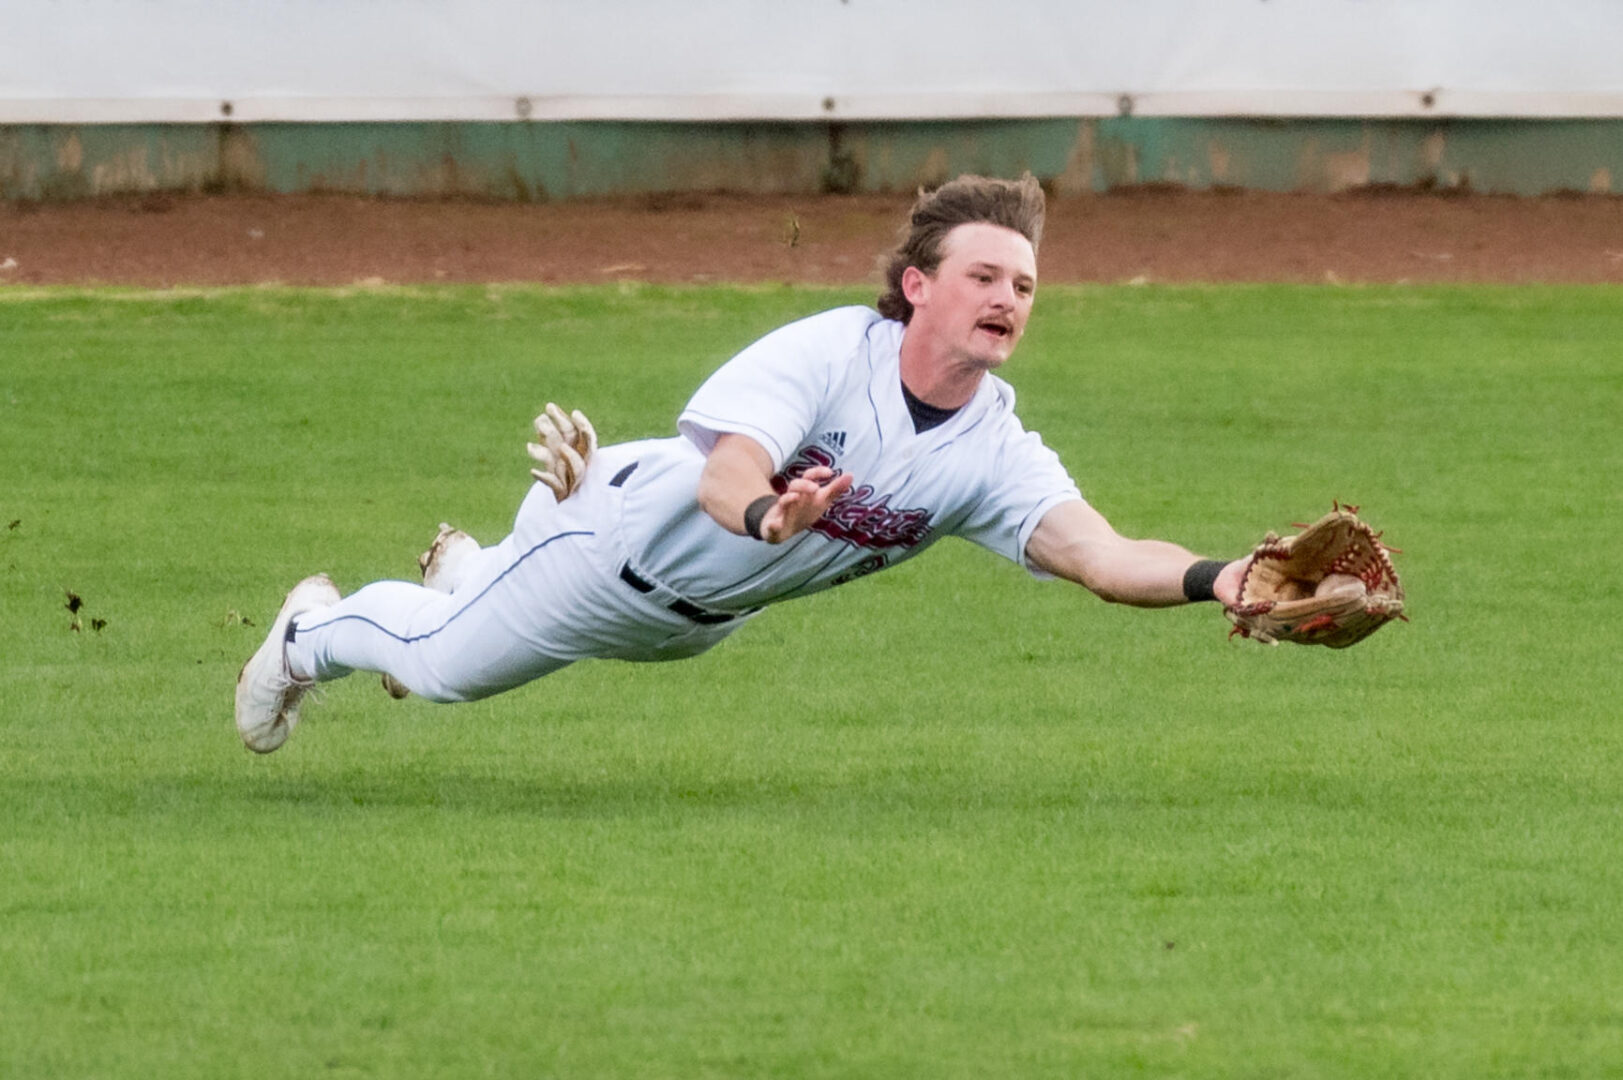 Chico State baseball outfielder Troy Kent makes a diving catch.